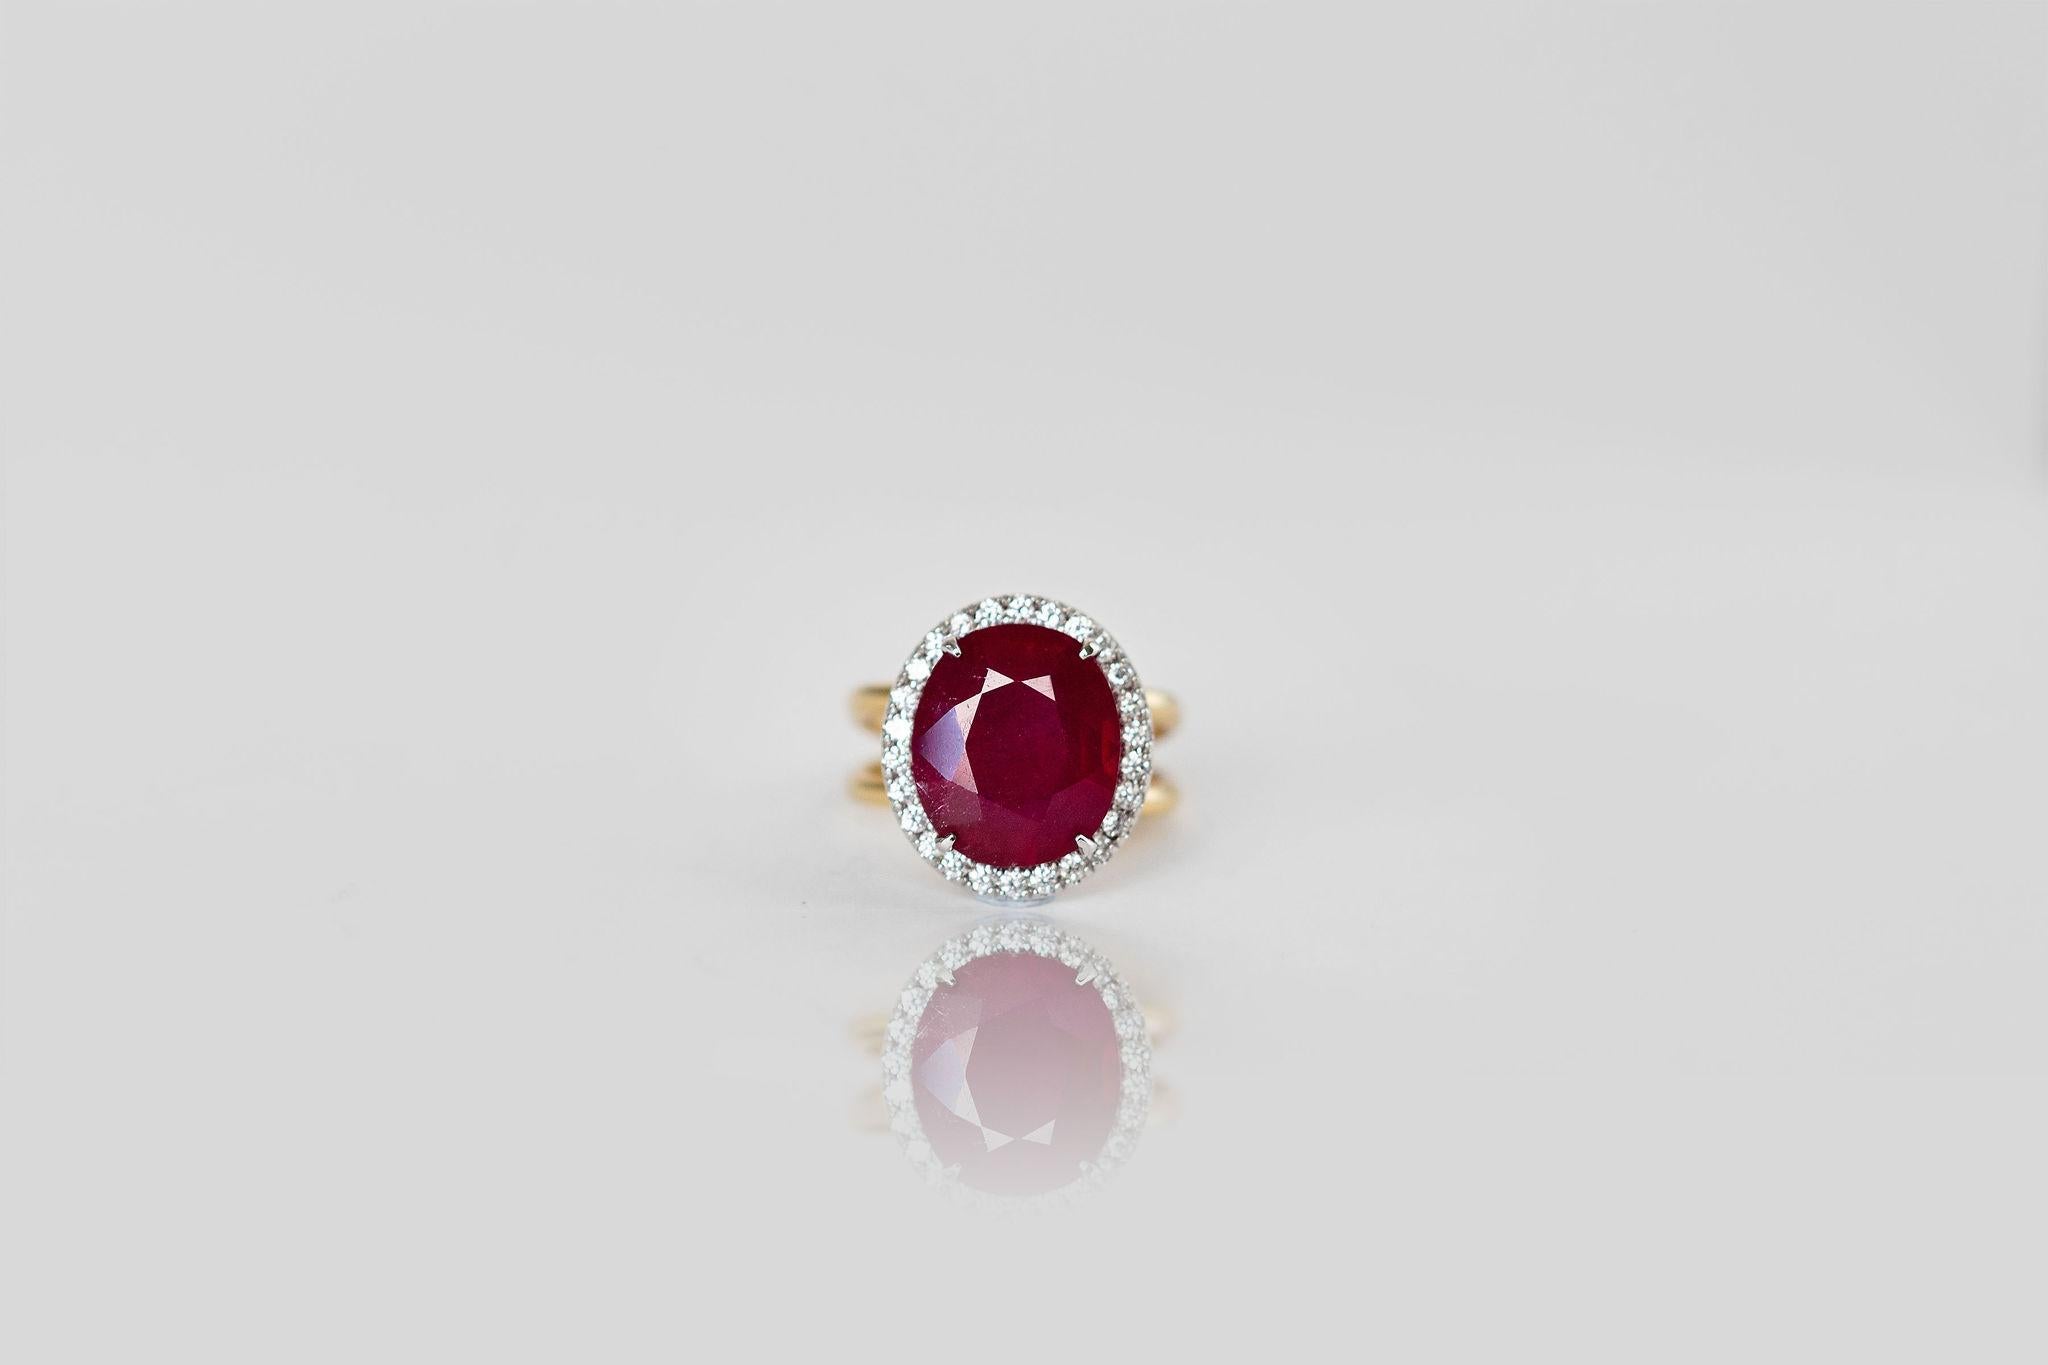 Brilliant Cut Certified 9 Carat Red Ruby and Diamond Ring, 14k Yellow Gold